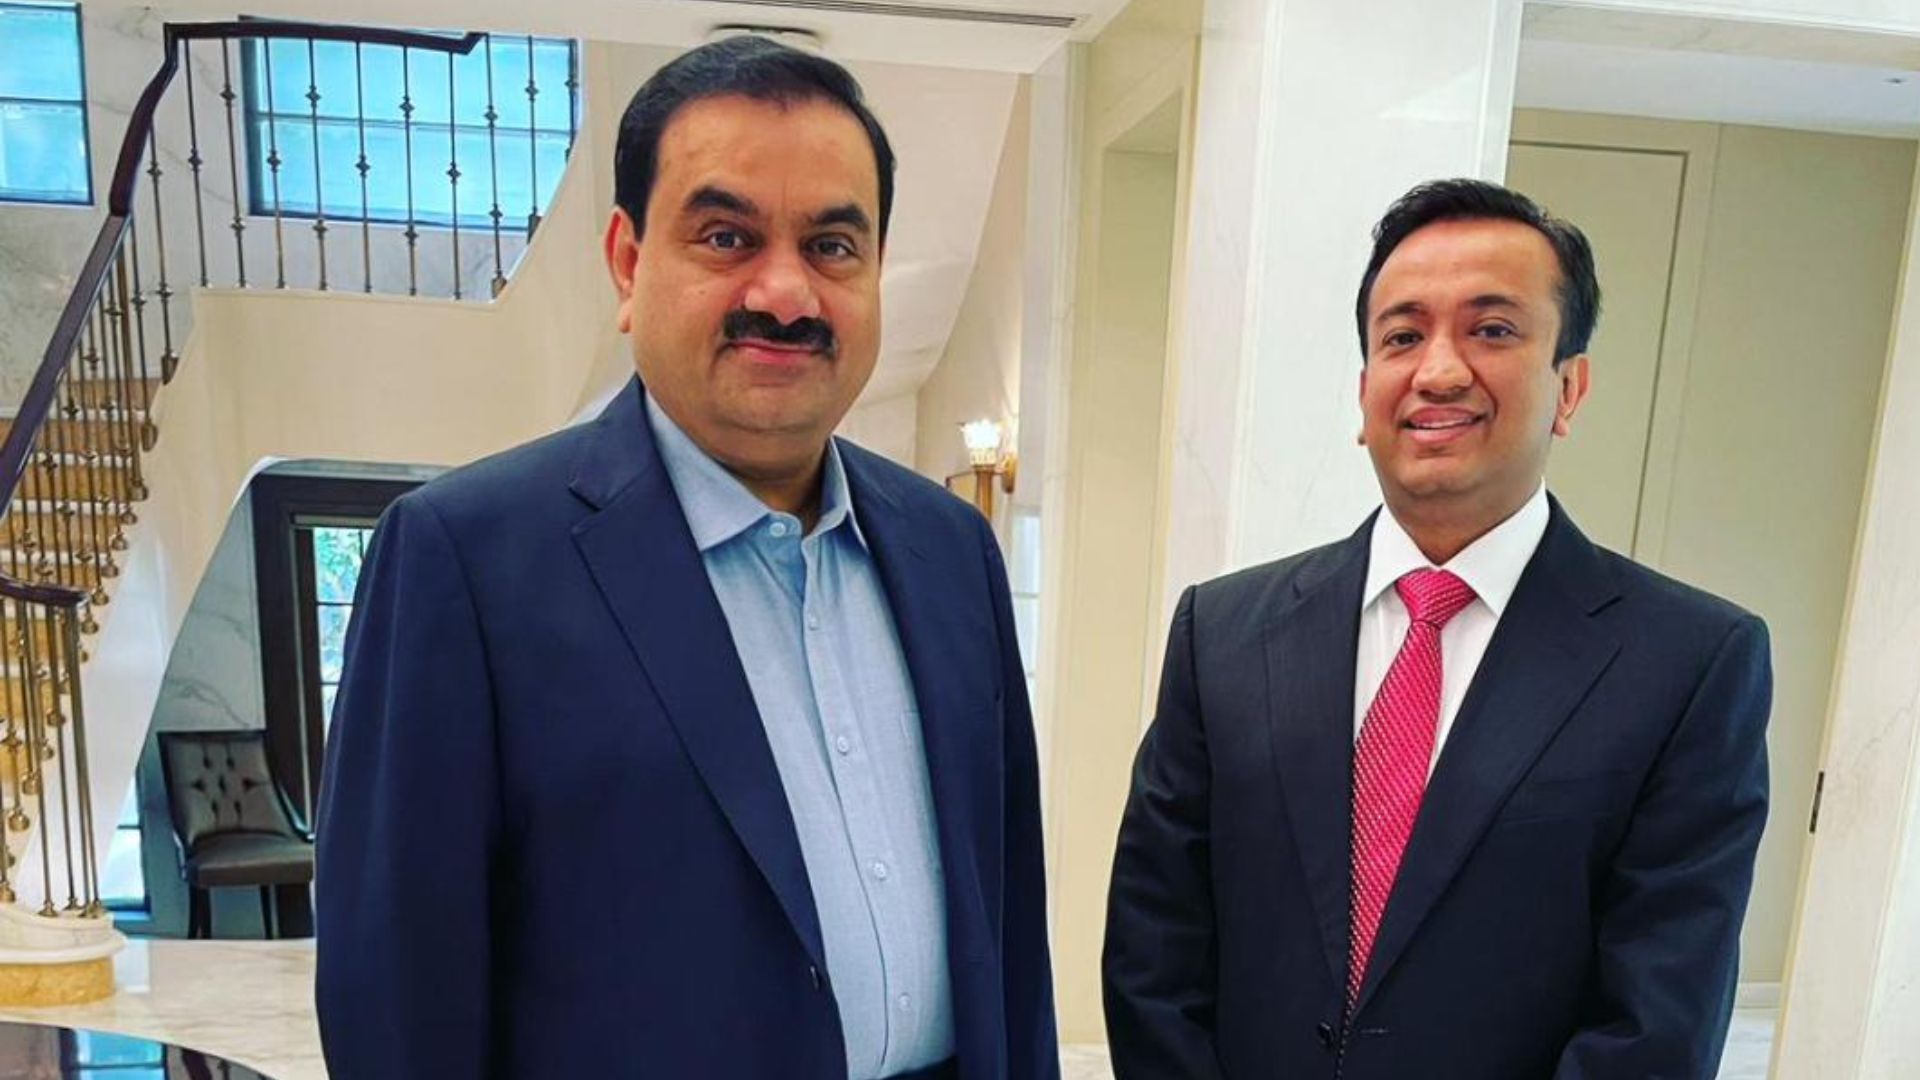 Chaudhary Group and Adani Group’s Cement Business Forge Strategic Partnership